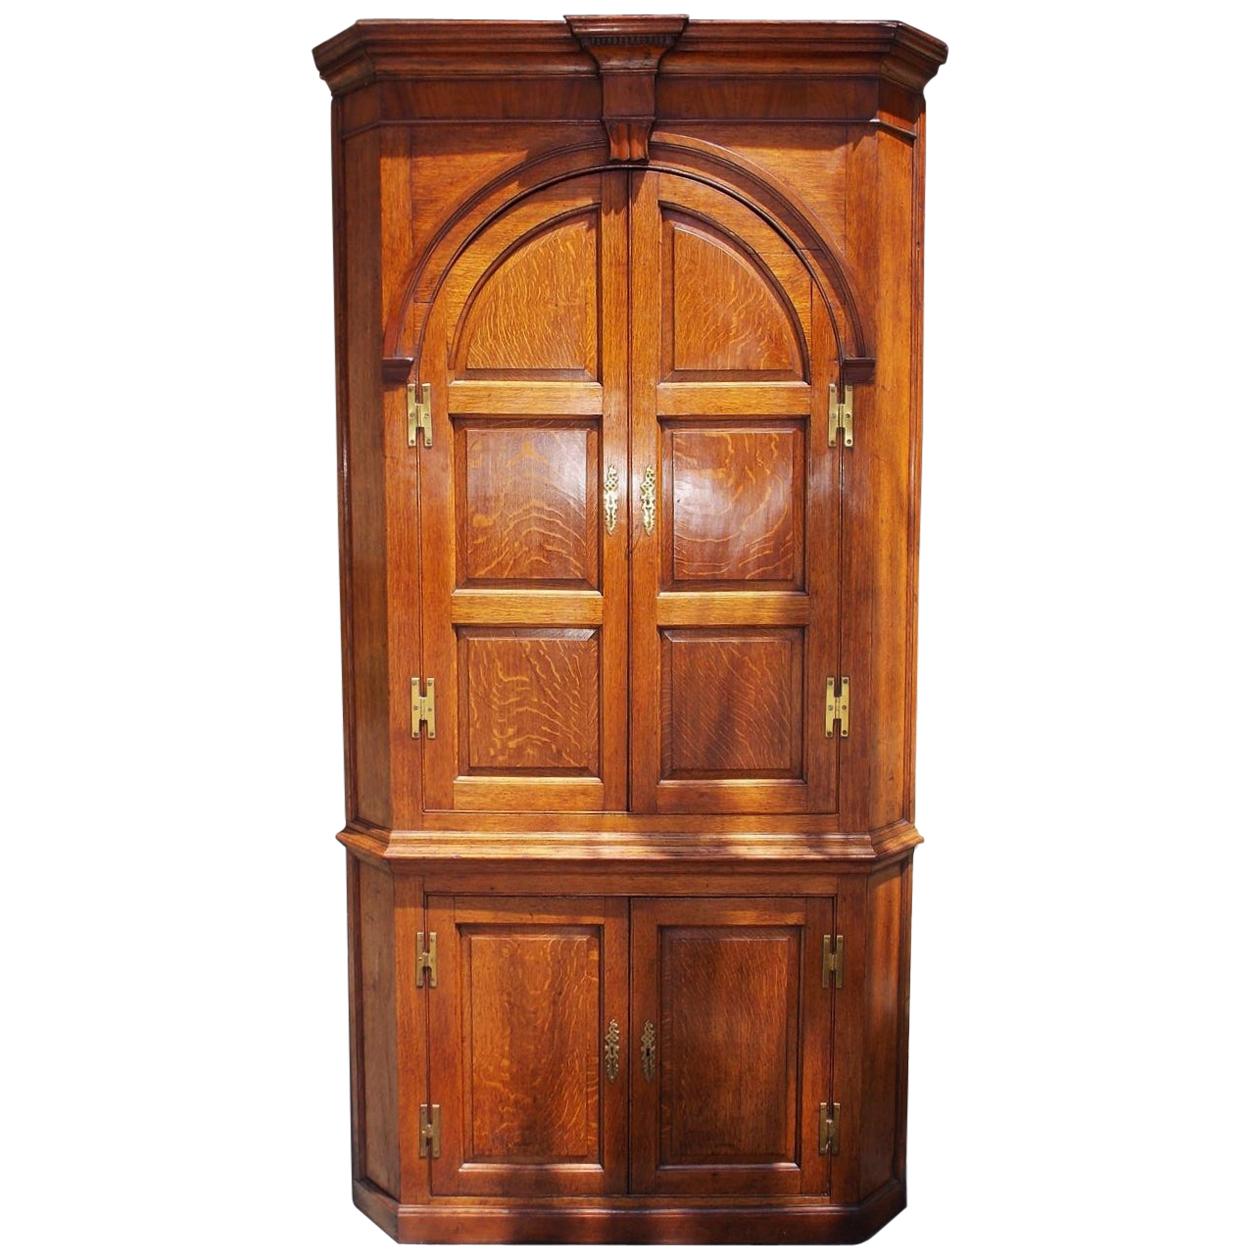 English Oak Arched and Paneled Blind Door H-Hinged Corner Cabinet, Circa 1770